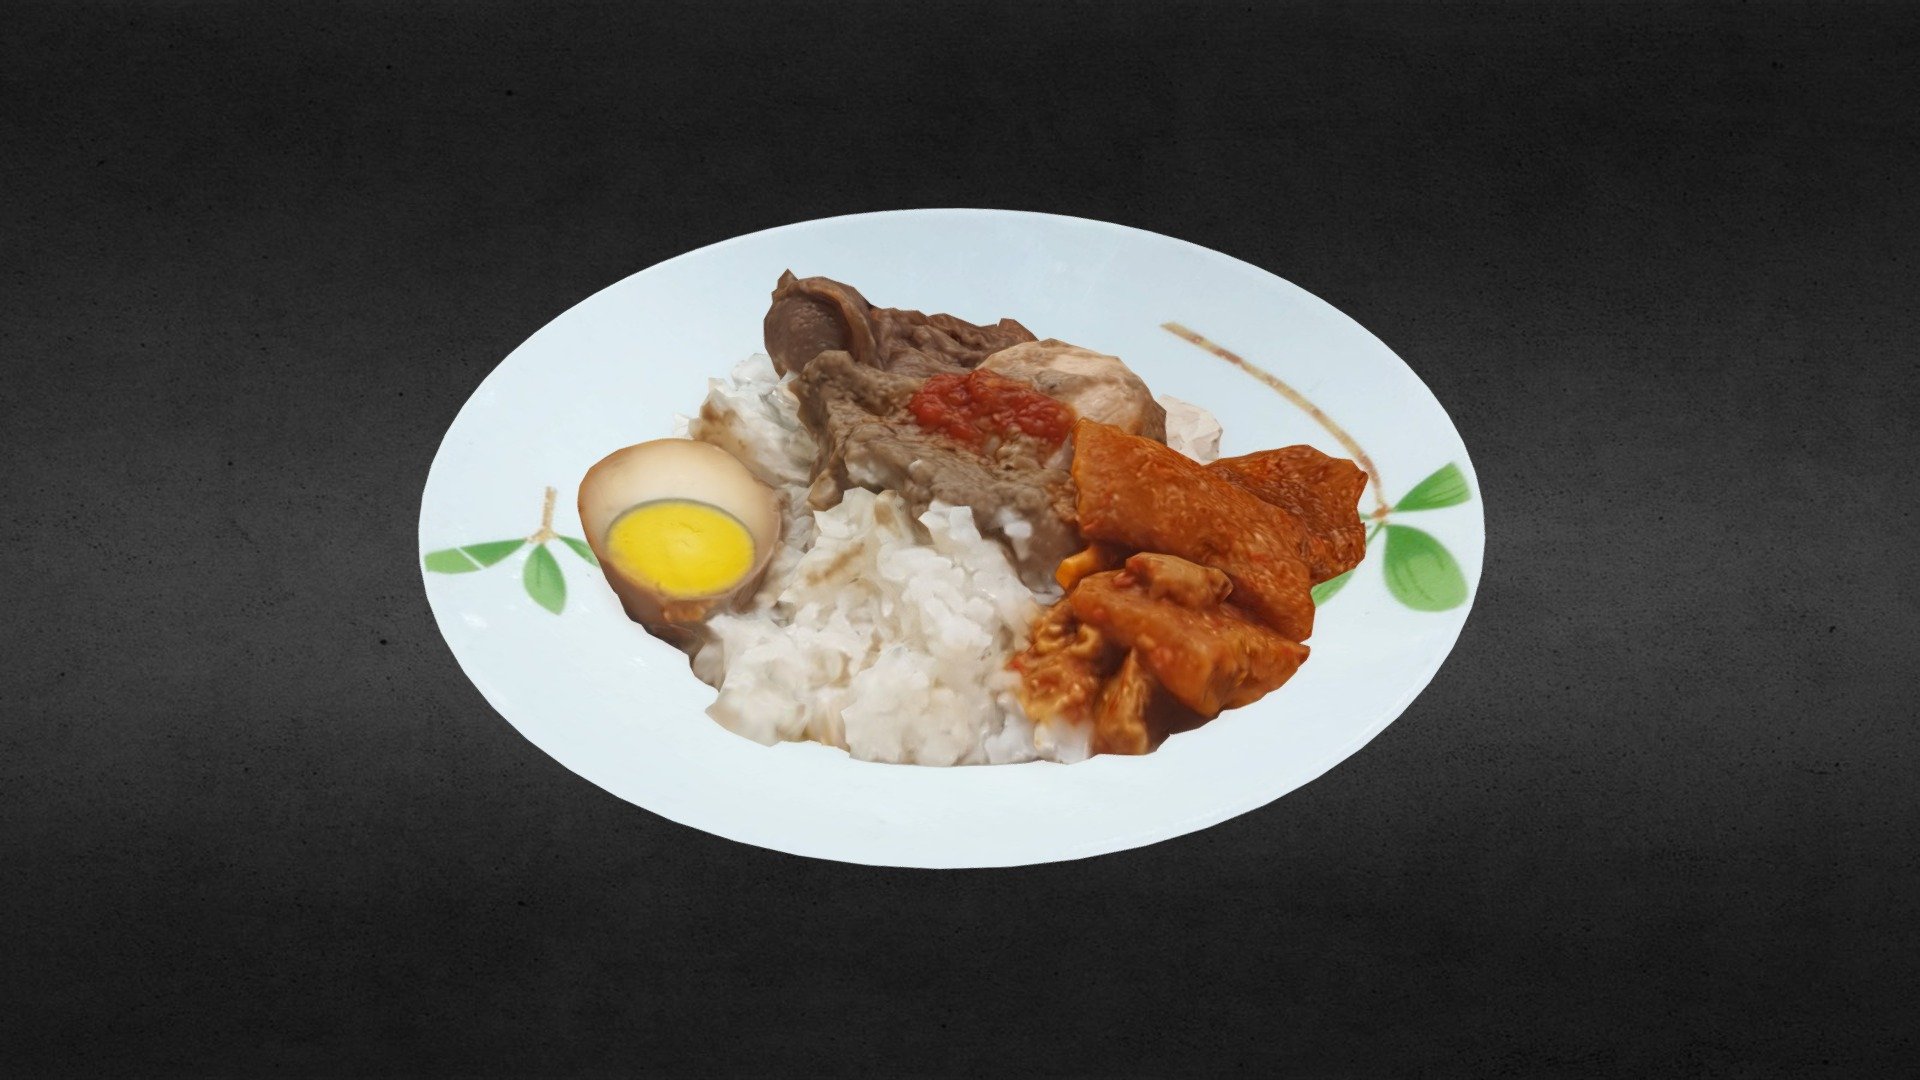 Gudeg is a delicious traditional Javanese dish, Indonesian cuisine. Made from young unripe jack fruit (that brown thing). Gudeg is commonly served with steamed rice, egg, chicken, and krecek (a stew made of crisp beef skins).
if you visit Indonesia, don't forget to try this dish - Gudeg - 3D model by Johanes Chendra (@venombite) 3d model